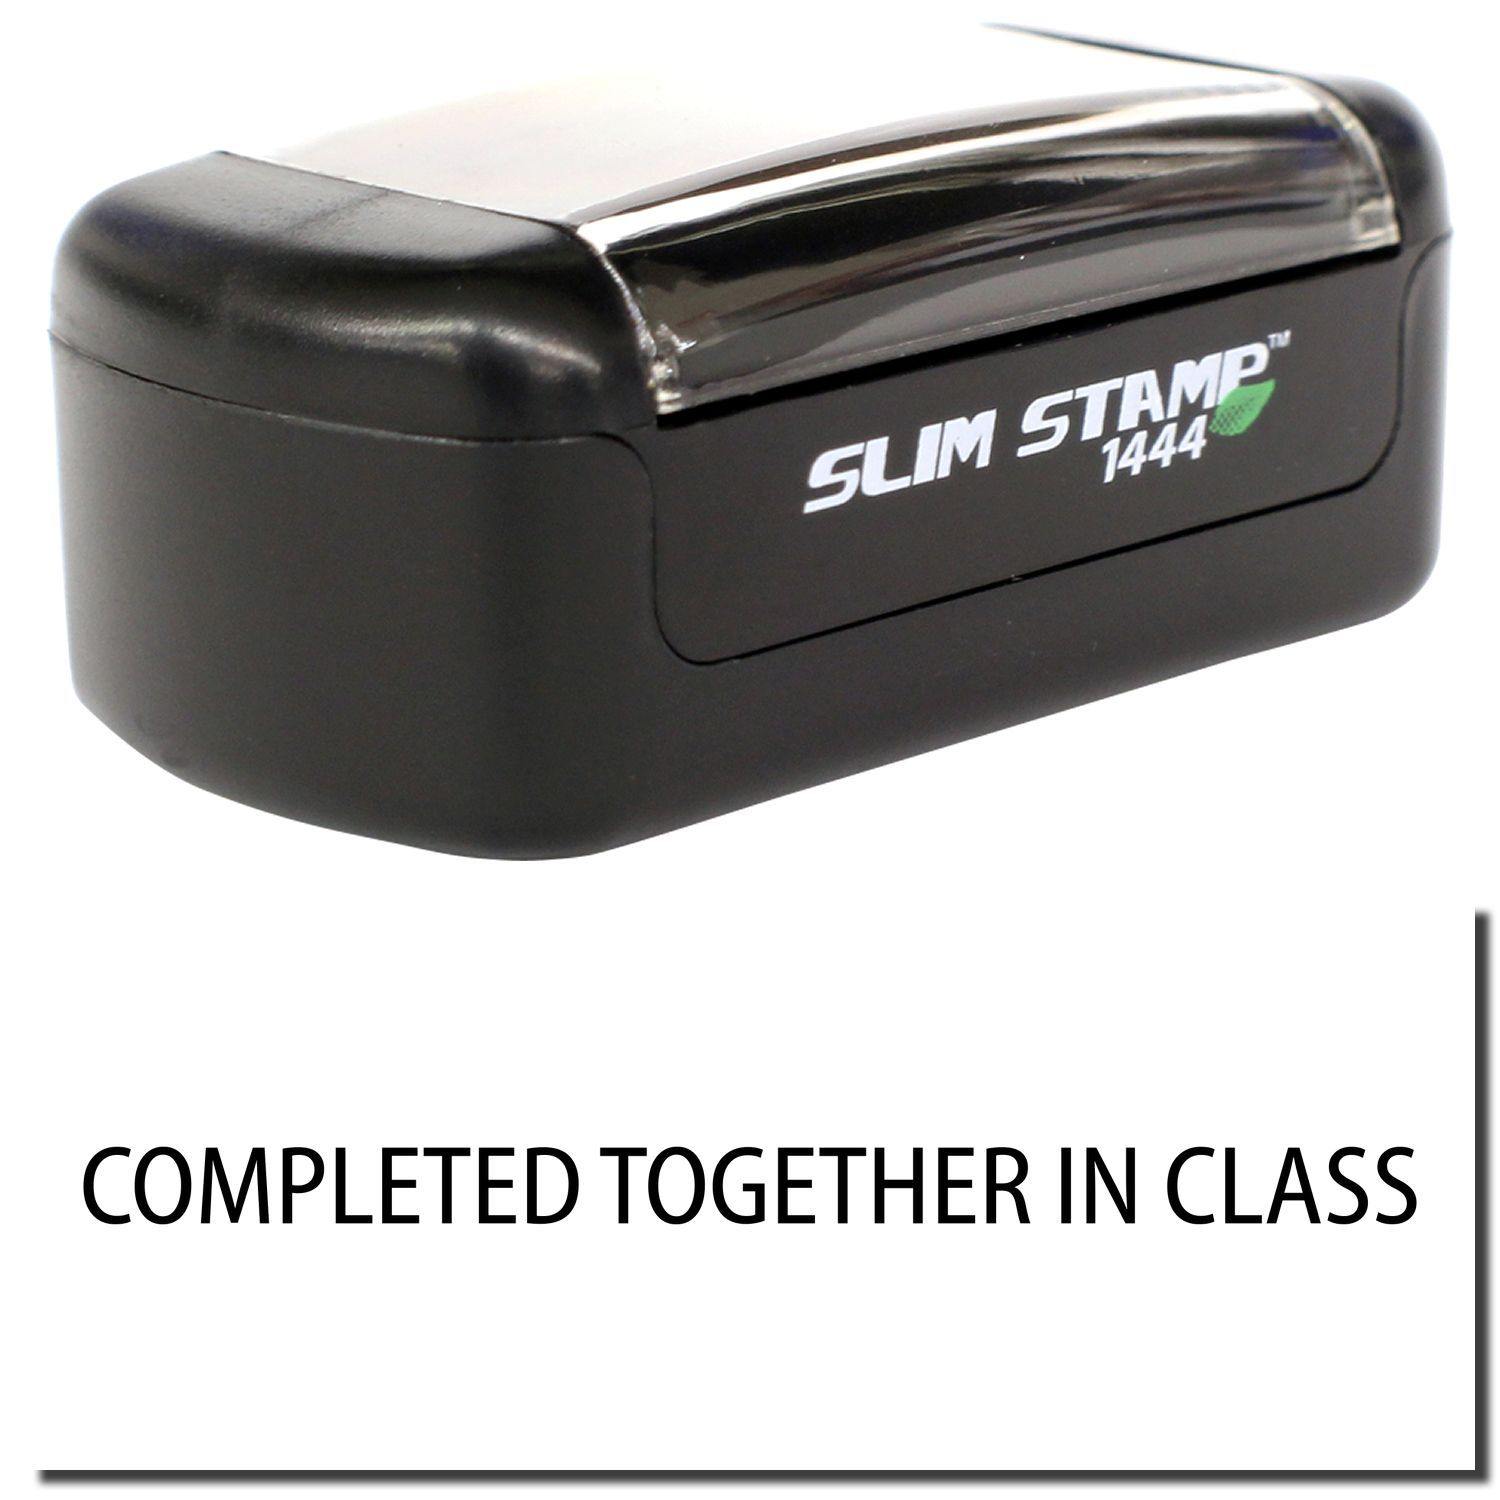 A stock office pre-inked stamp with a stamped image showing how the text "COMPLETED TOGETHER IN CLASS" is displayed after stamping.